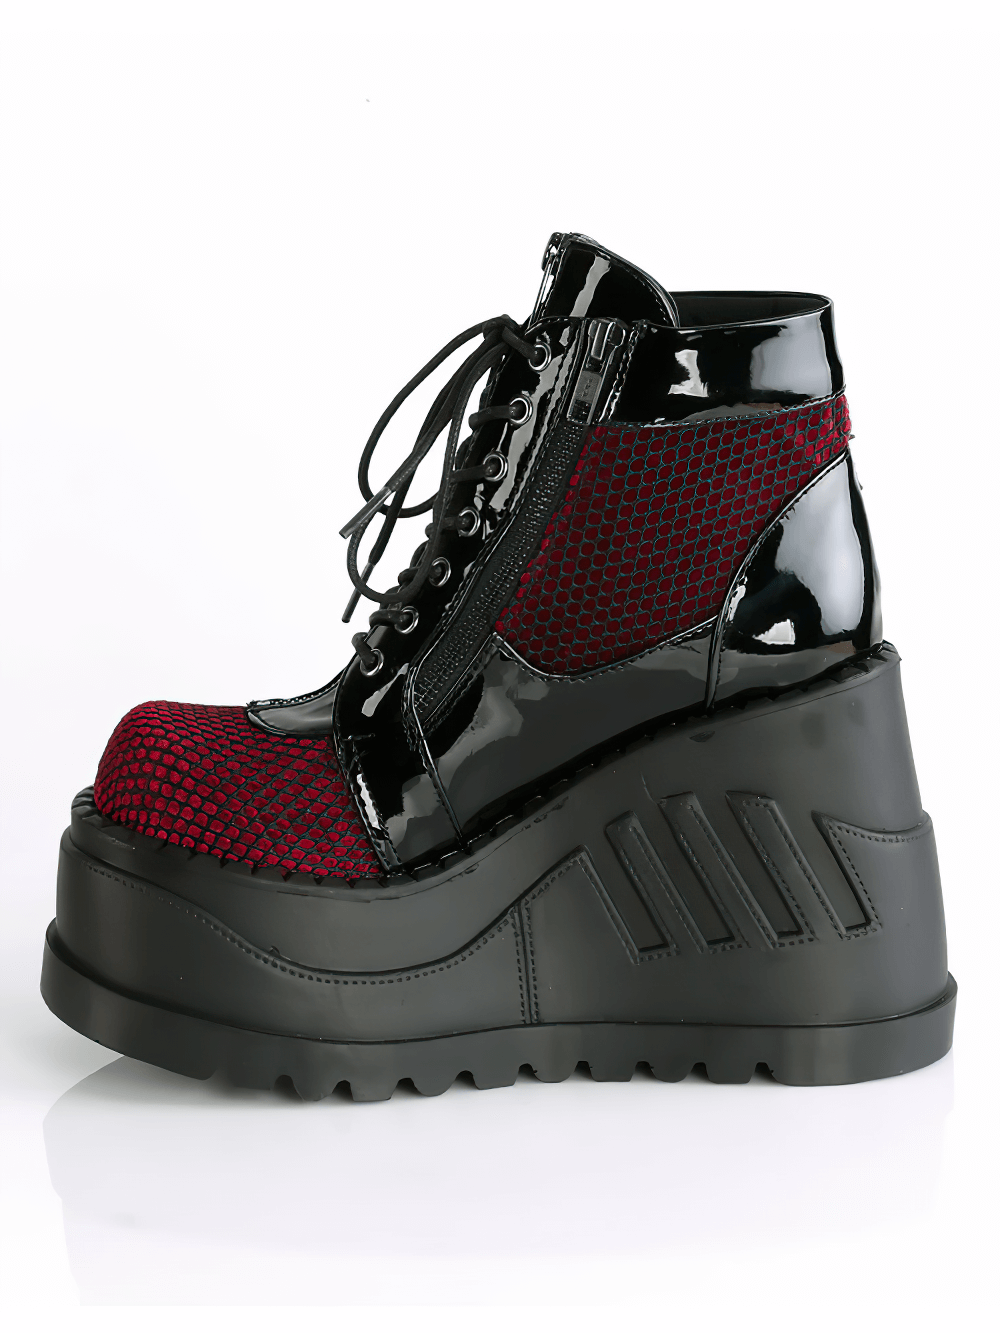 DEMONIA Gothic Platform Booties with Charms and Fishnet